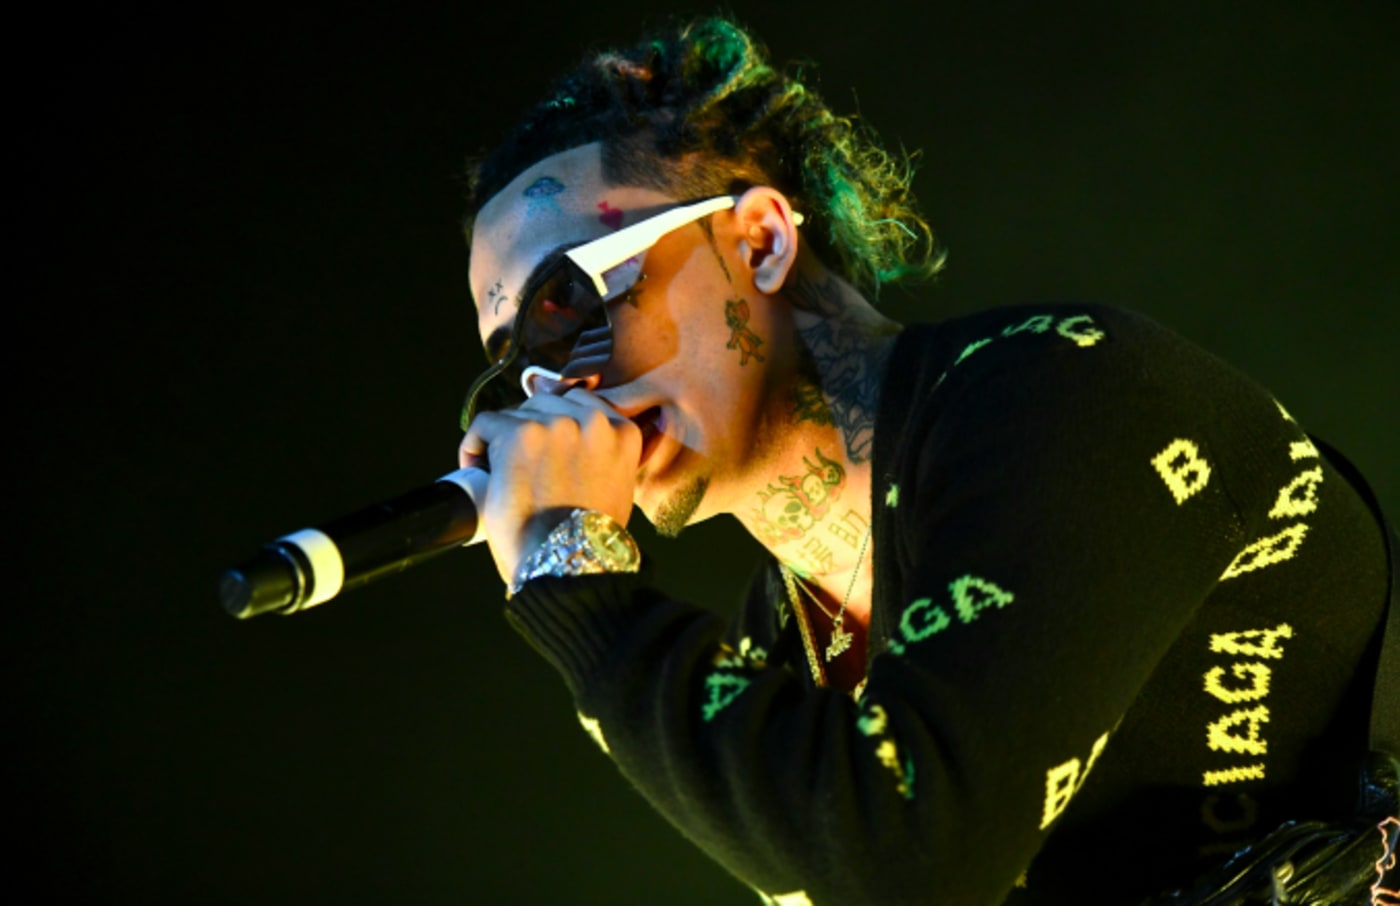 Rapper Lil Pump performs onstage during day 1 of the Rolling Loud Festival